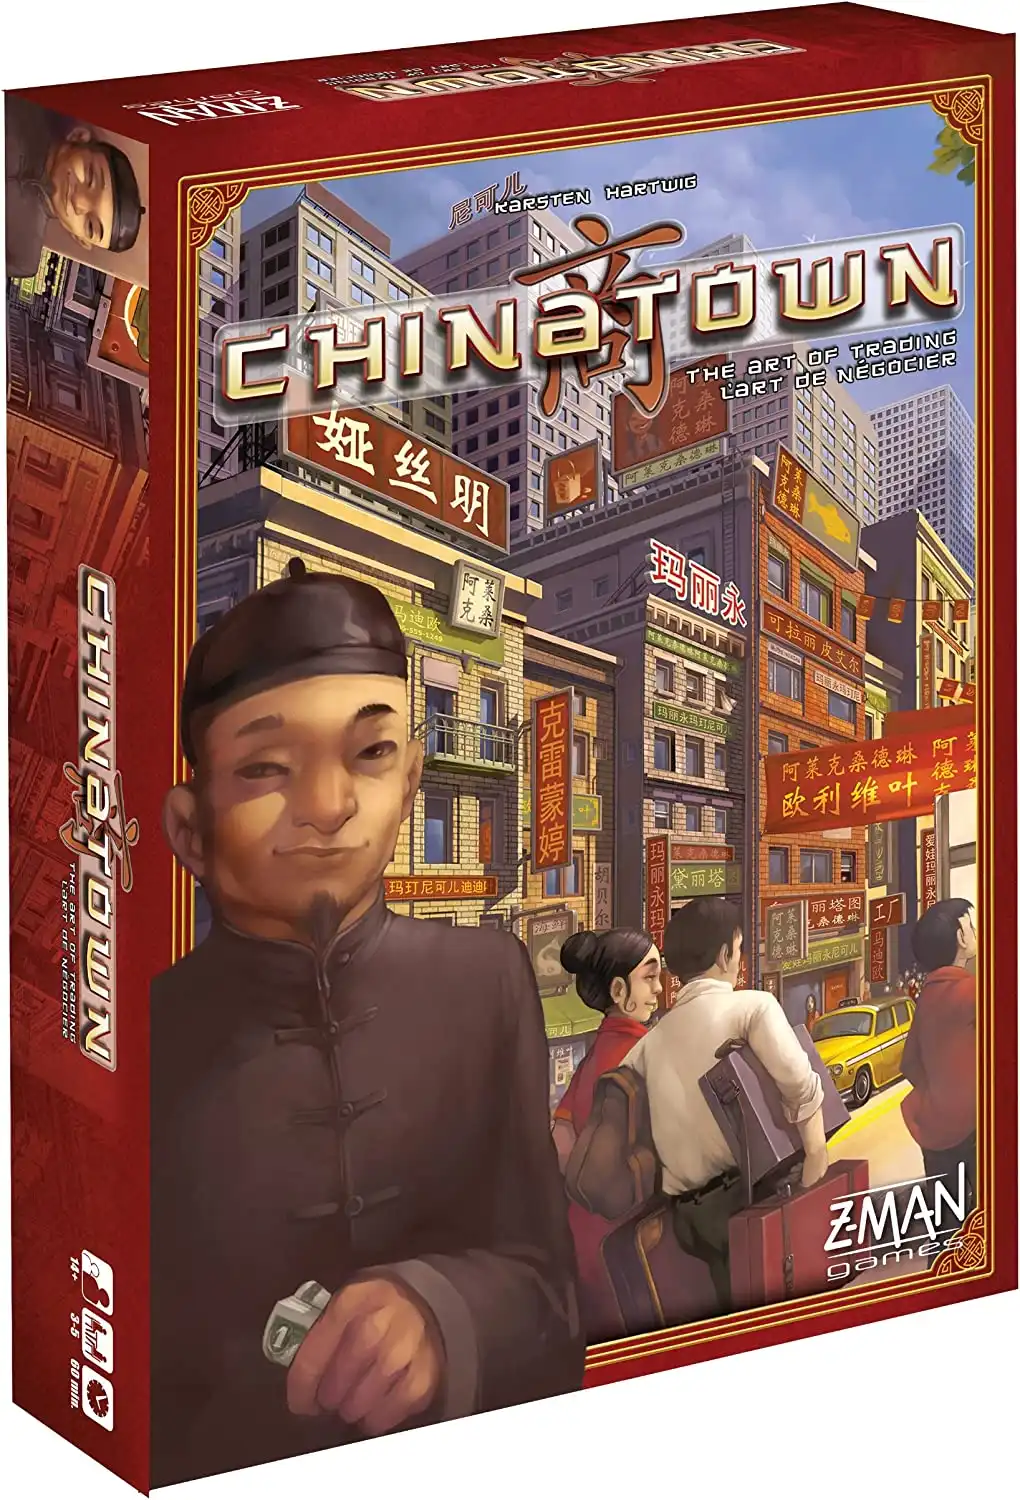 Hộp game Chinatown (1999) | Source: Z-Man Games